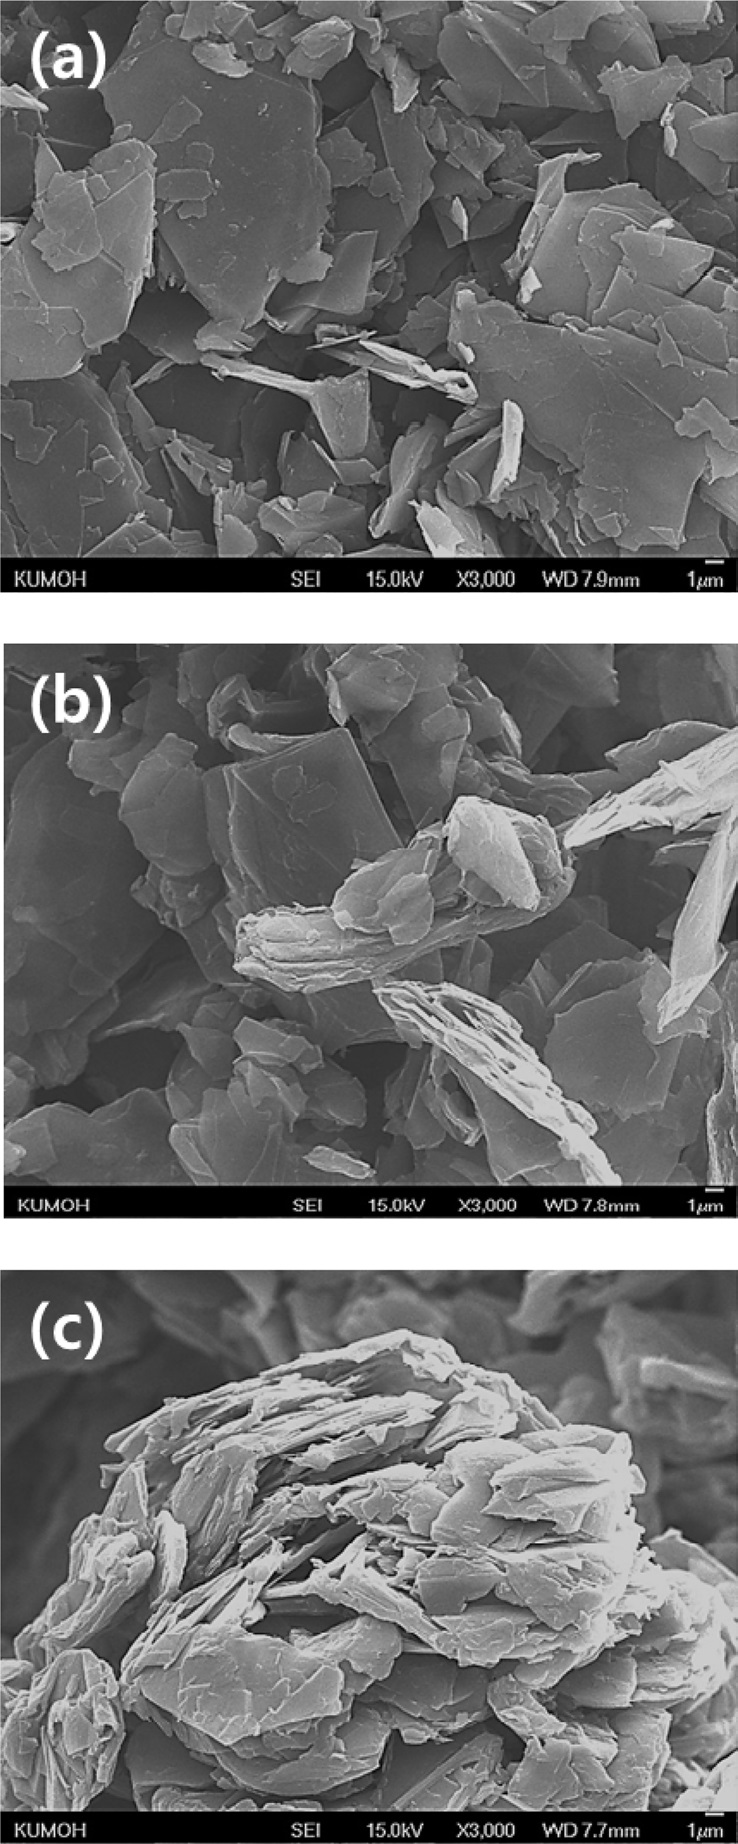 Scanning electron microscope images of raw graphite powder (a), graphite powder mixed with coal tar pitch (b) and graphite powder mixed with phenolic resin (c).